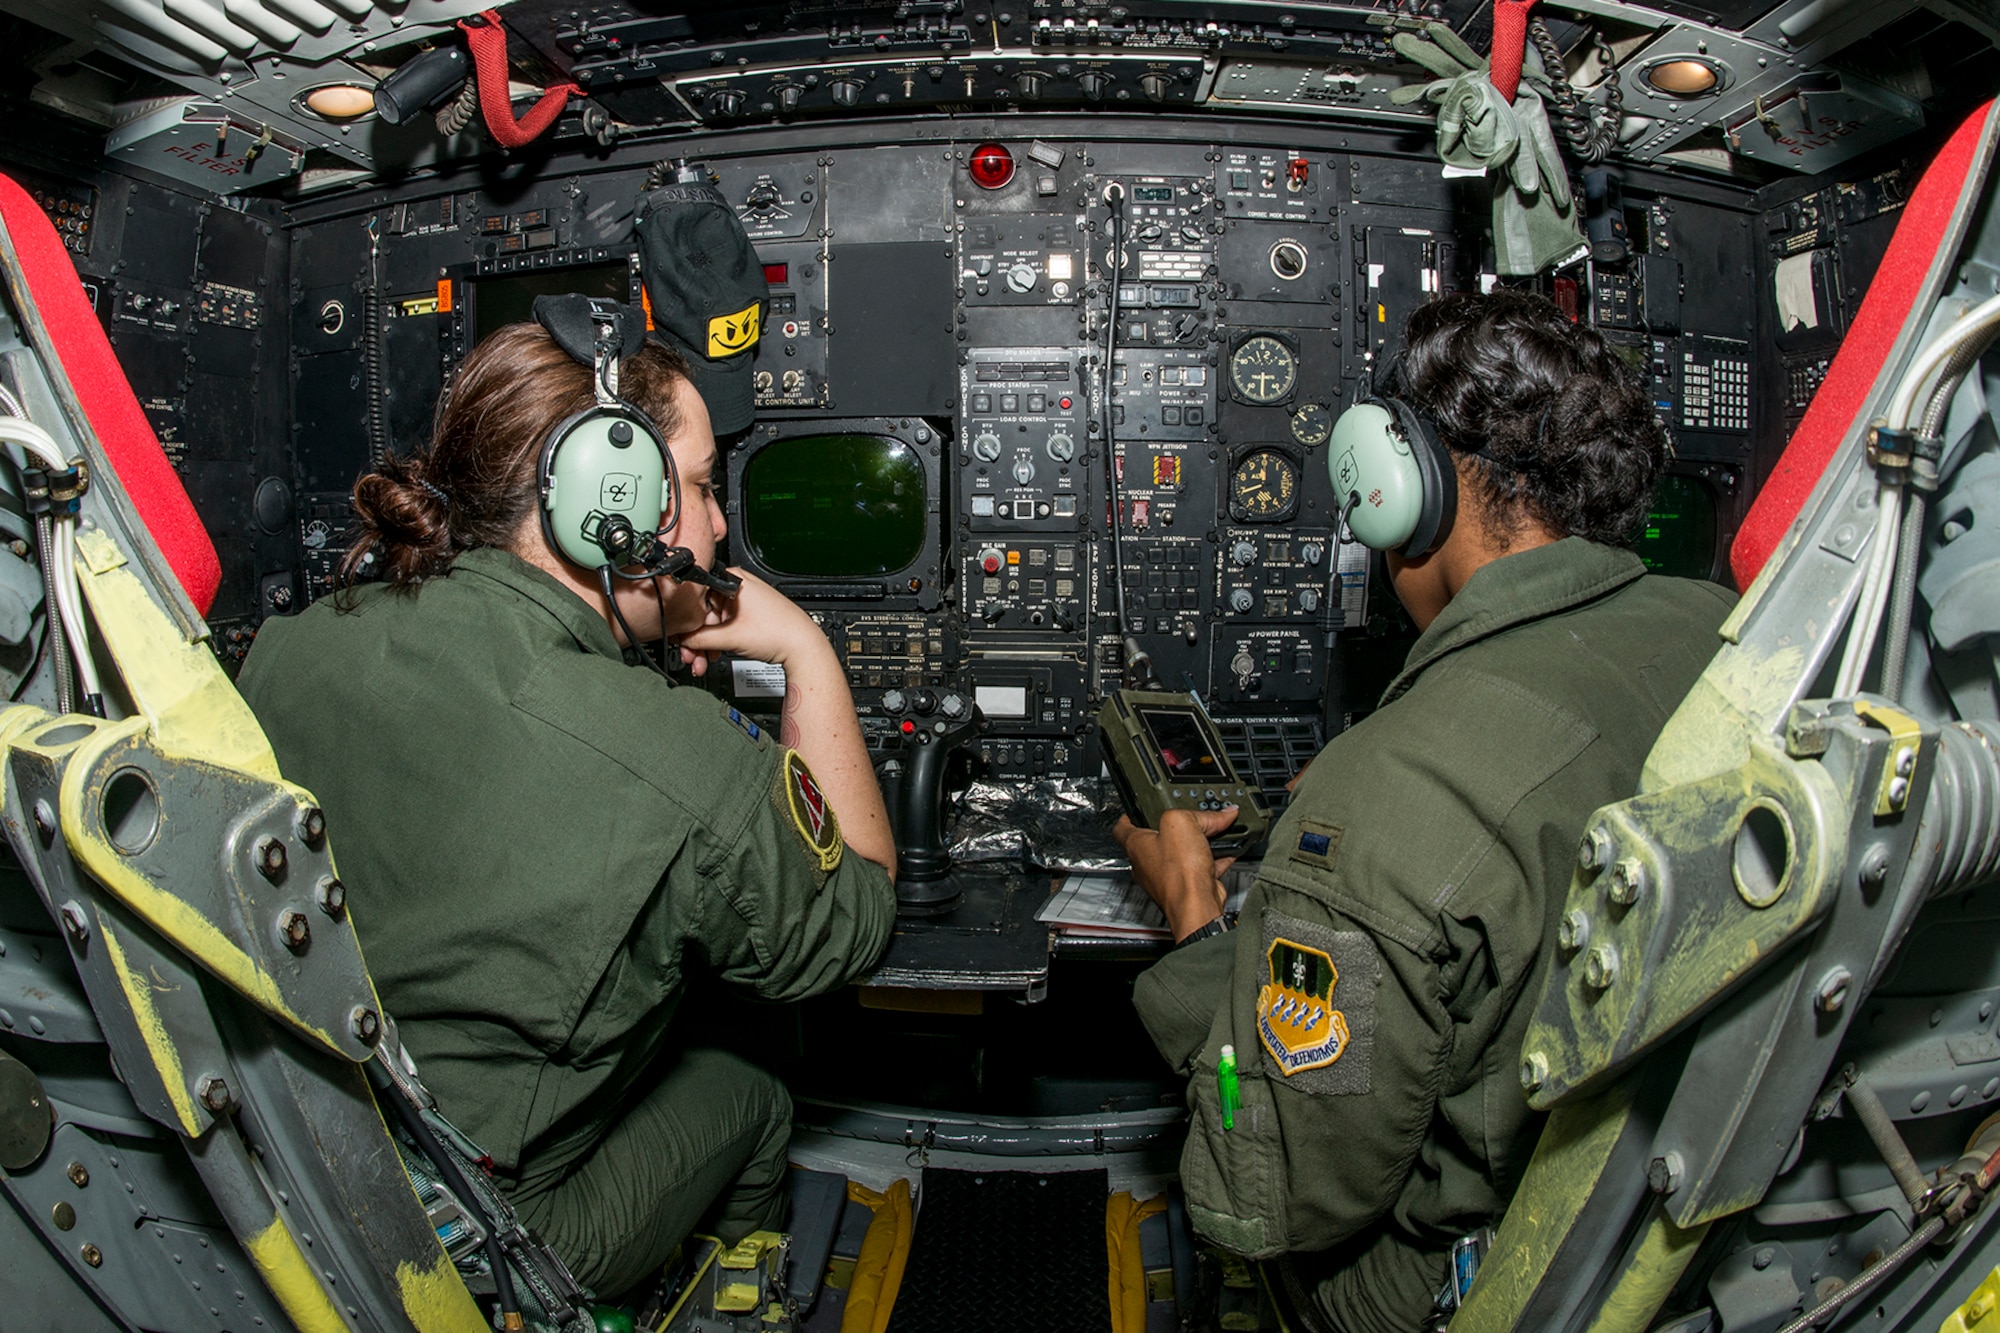 Two U.S. Air Force B-52 navigators prepare for a mission on Mar. 22, 2013, Barksdale Air Force Base, La. In recognition of Women’s History Month, the mission consisted of two B-52H Stratofortress bombers flown by two all-female aircrews made up from members of the Air Force Reserve Command’s 93rd and 343rd Bomb Squadrons and the 2nd Bomb Wing’s 11th, 20th and 96th Bomb Squadrons. (U.S. Air Force photo by Master Sgt. Greg Steele/Released)